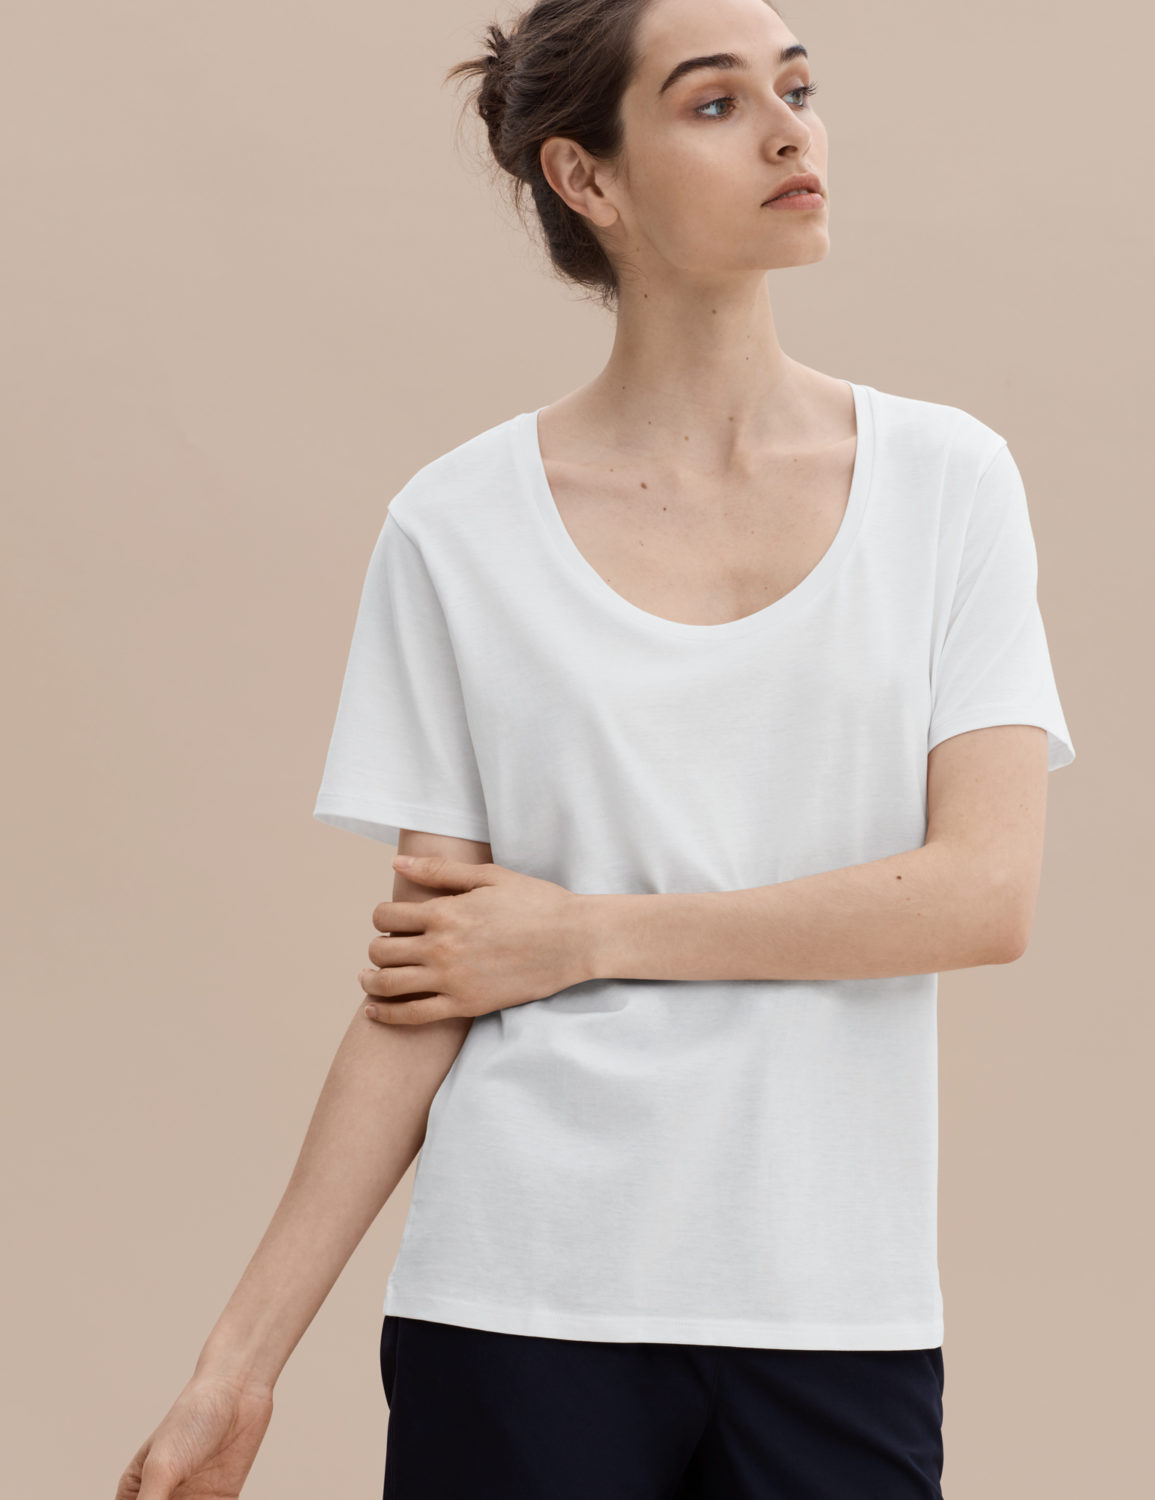 women's relaxed white t-shirt with u-neck